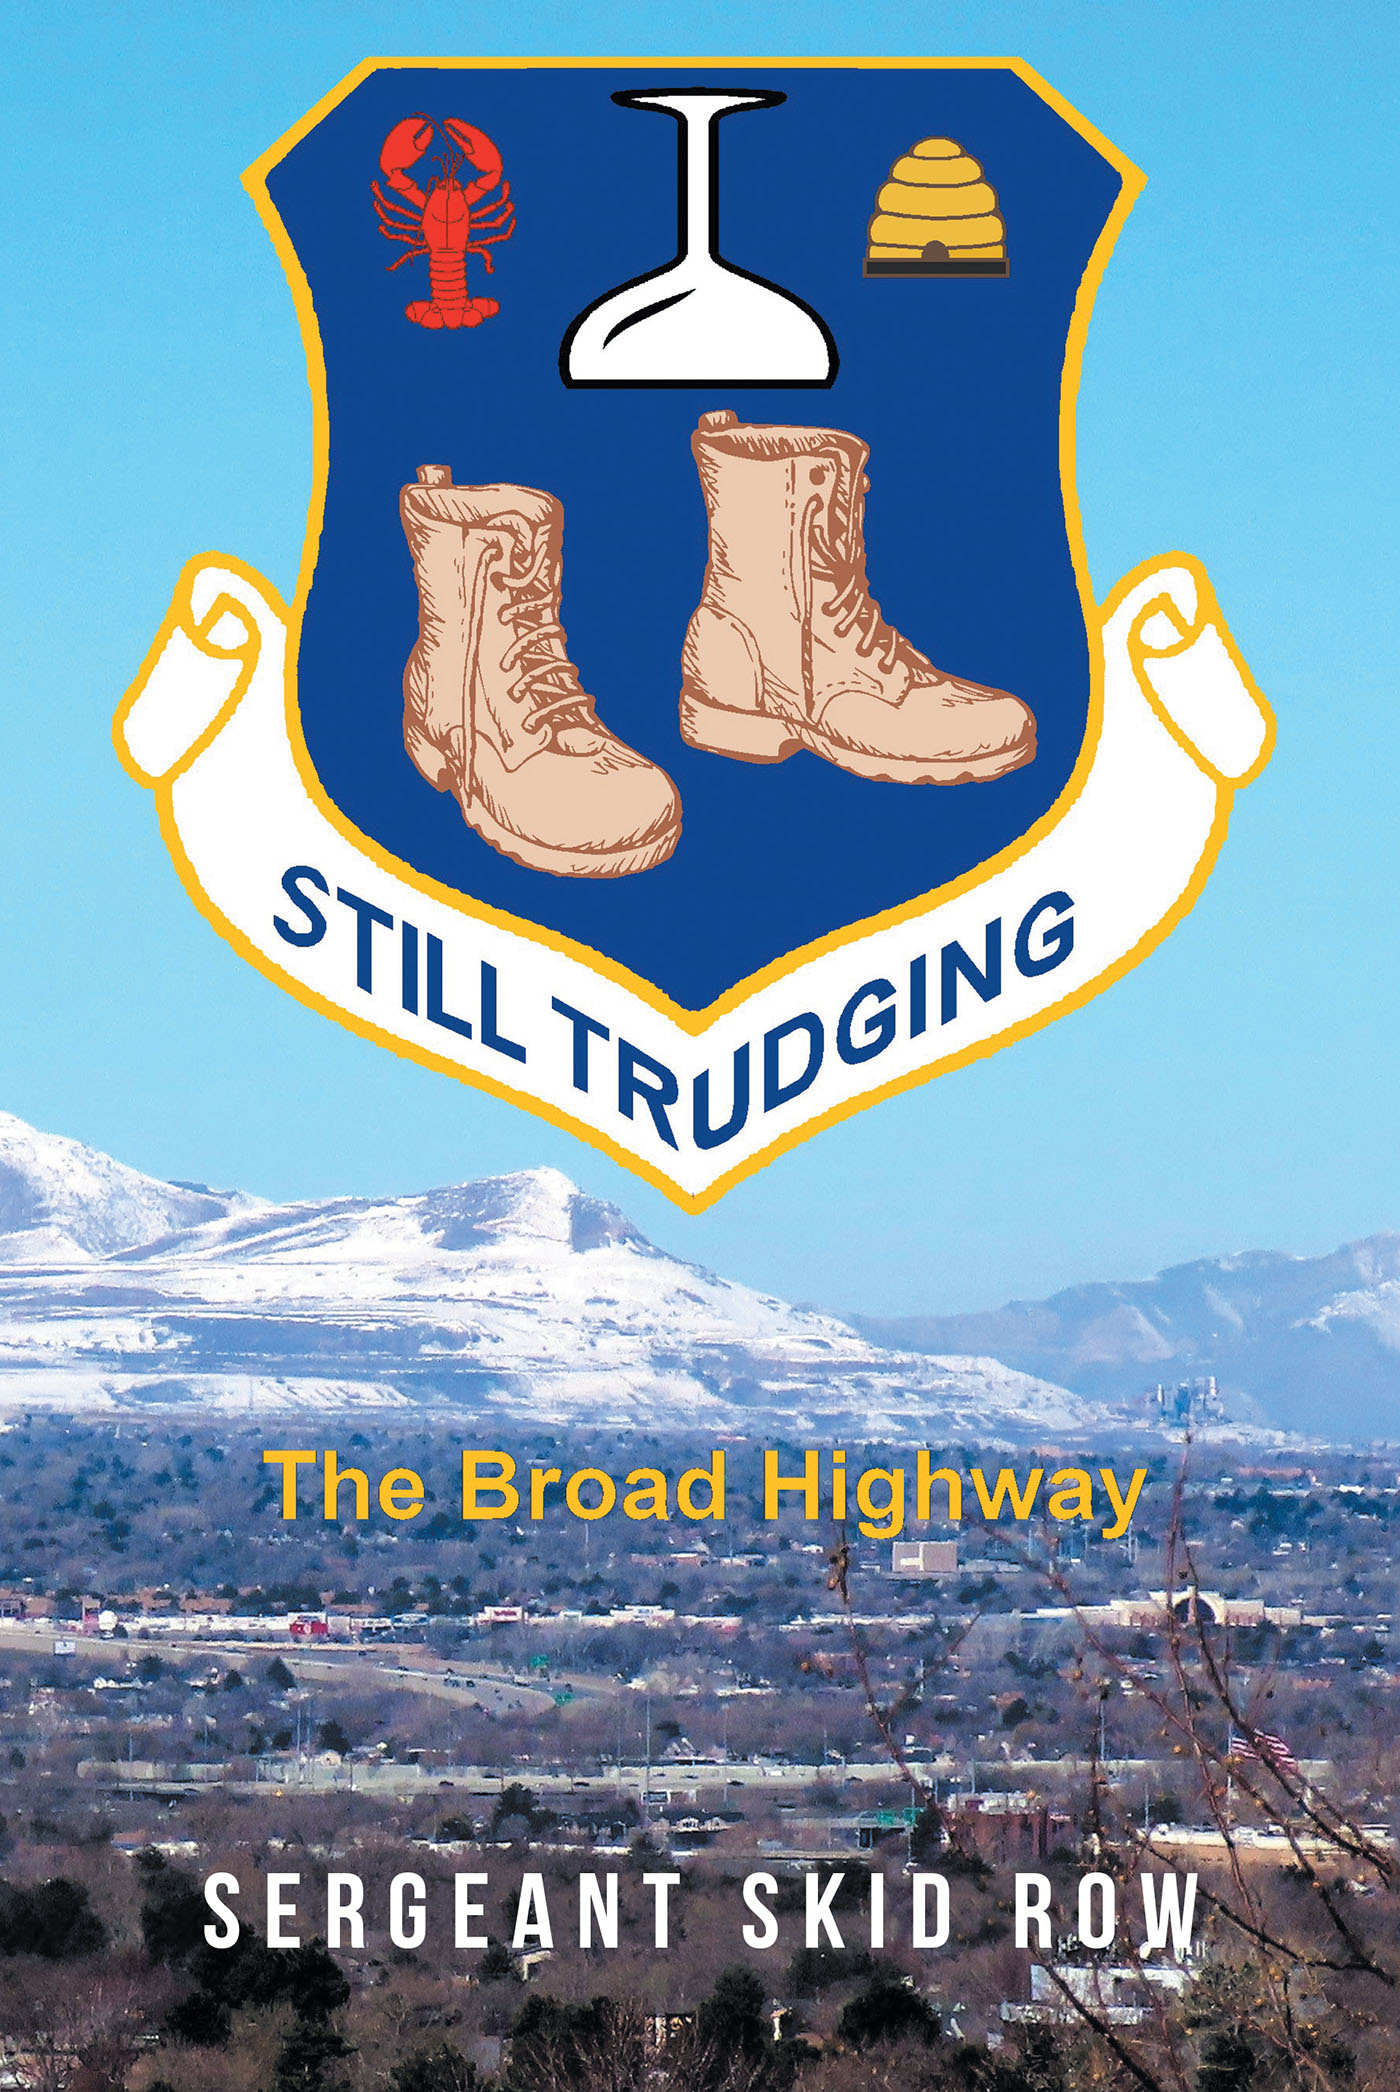 Author Sergeant Skid Row’s New Book, "Still Trudging: the Broad Highway," is an Engaging Series of Short Stories Inspired by the Author's Journey to Healing and Sobriety